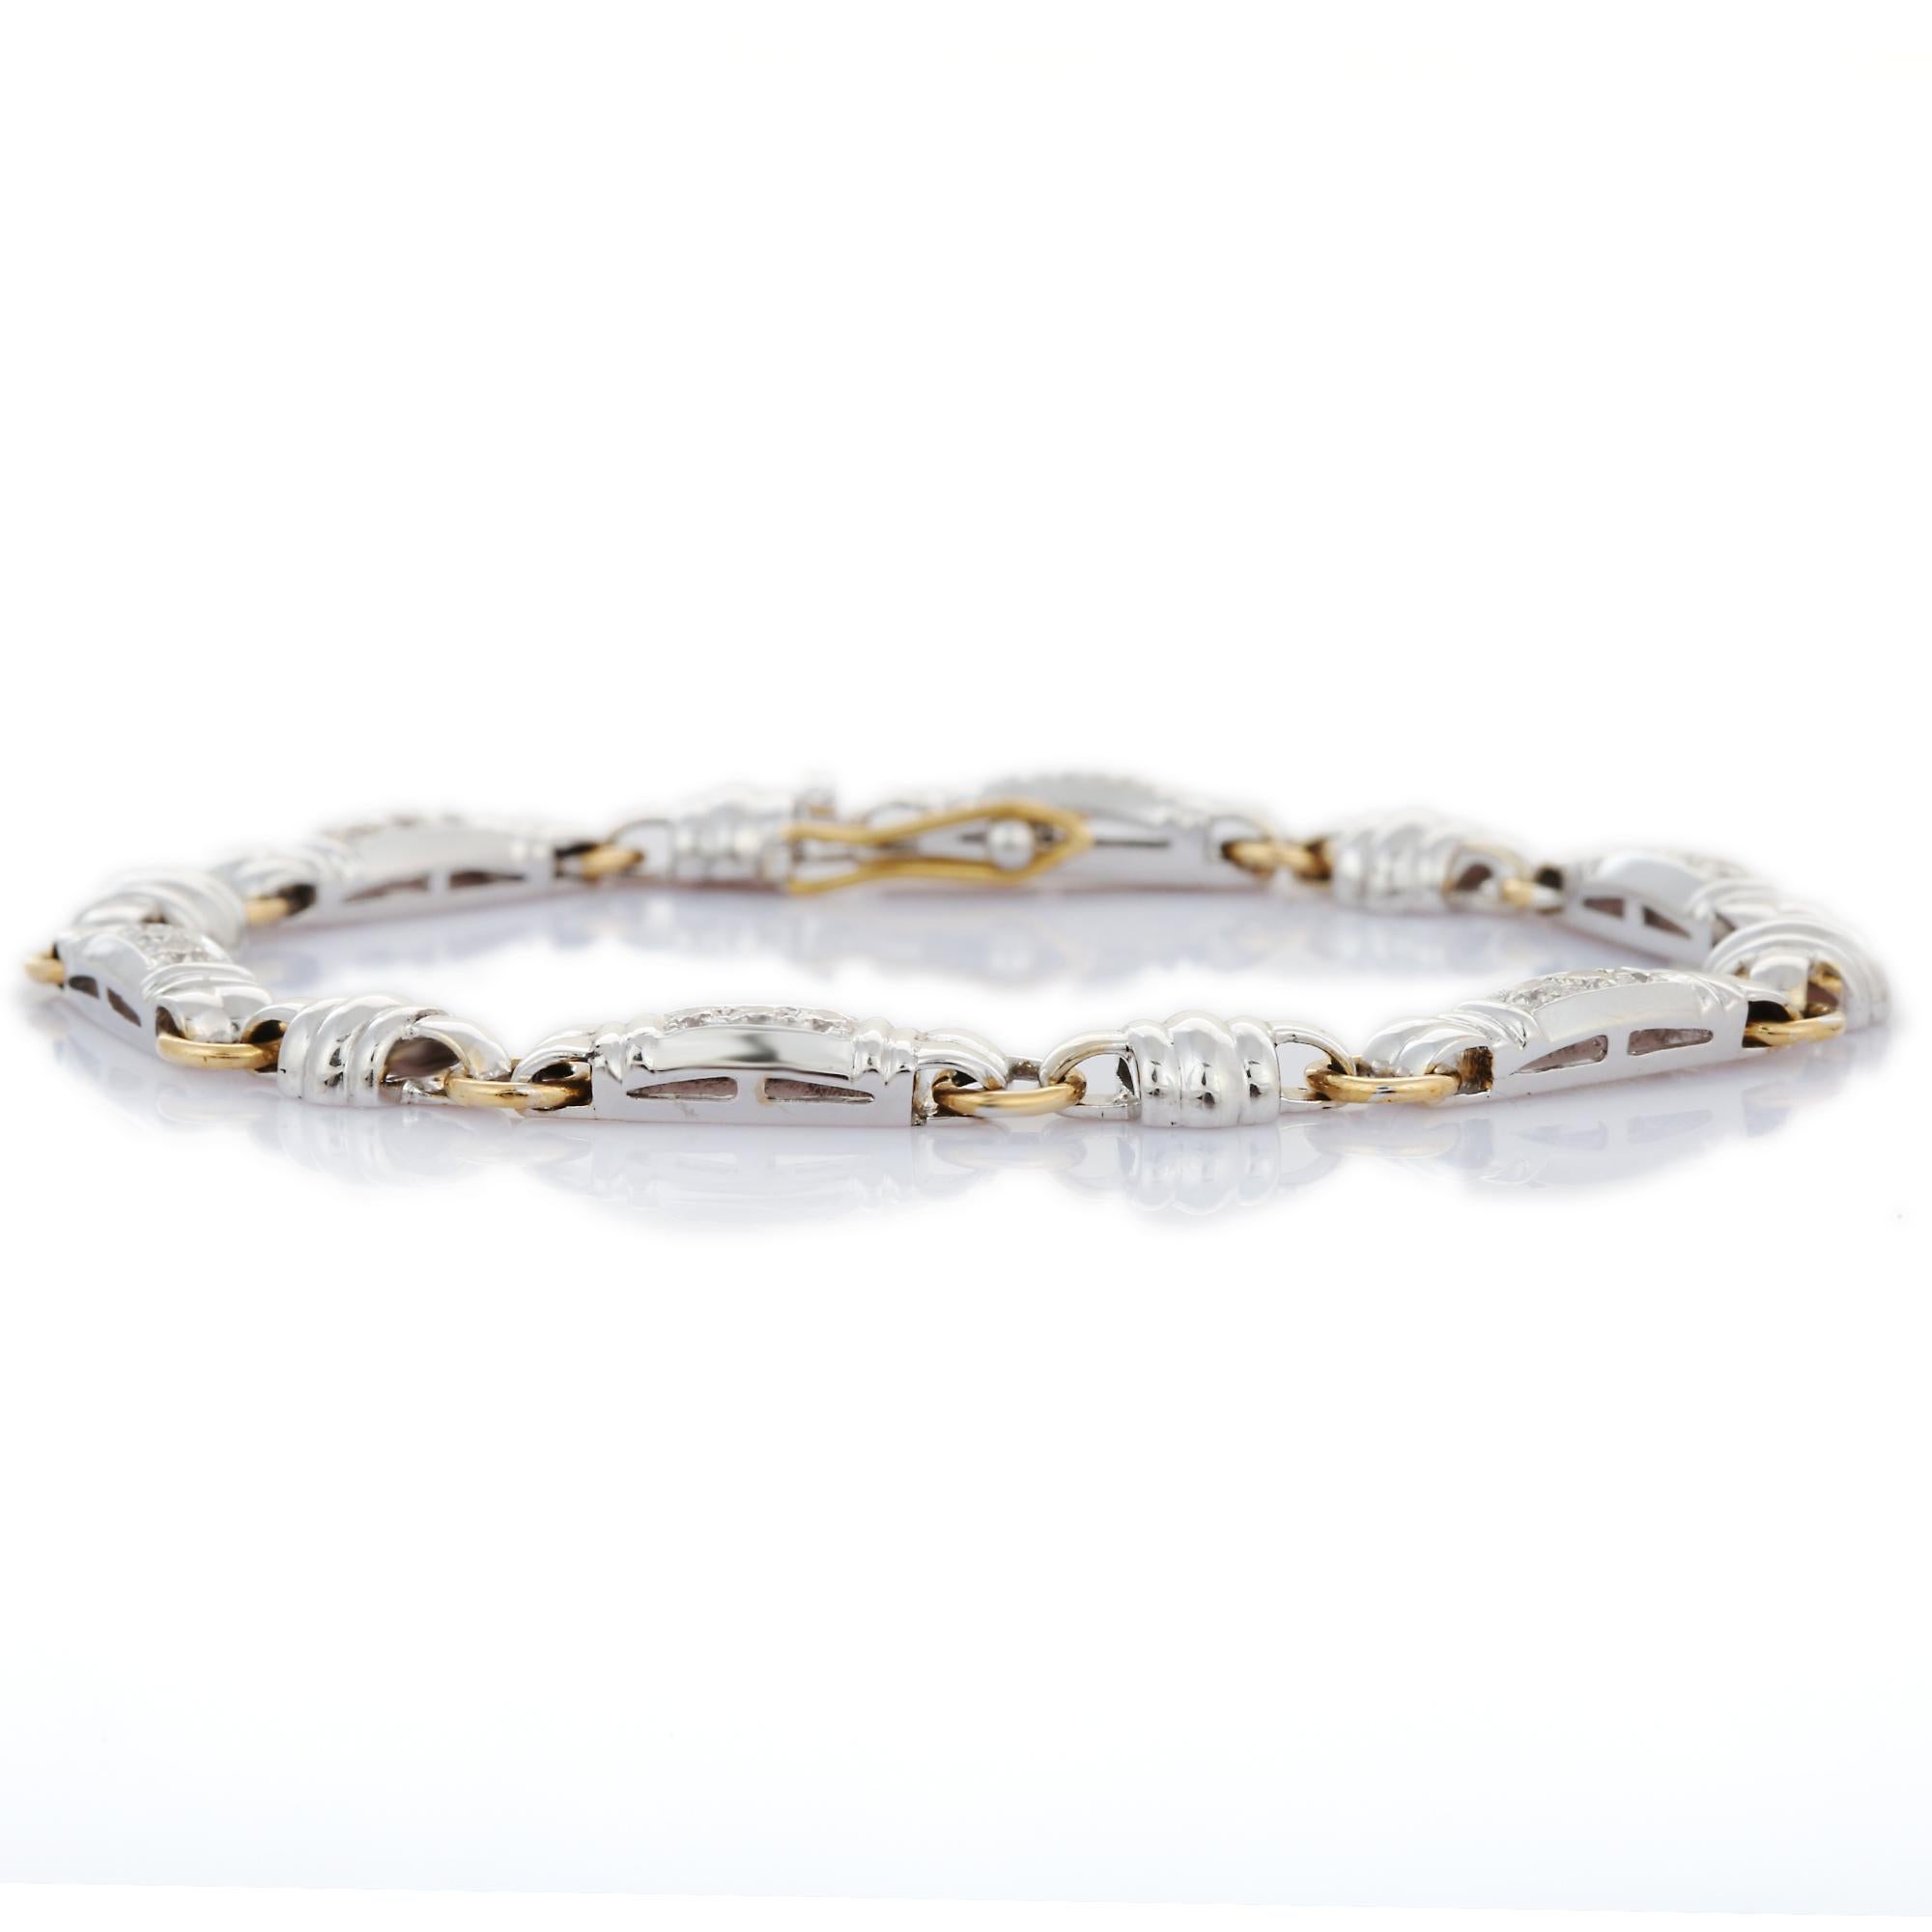 This Art Deco Diamond Men's Bracelet Gift in 18K gold showcases sparkling natural diamonds, weighing 1.05 carats. 
April birthstone diamond brings love, fame, success and prosperity.
Designed with diamonds studded in a bracelet to make you stand out